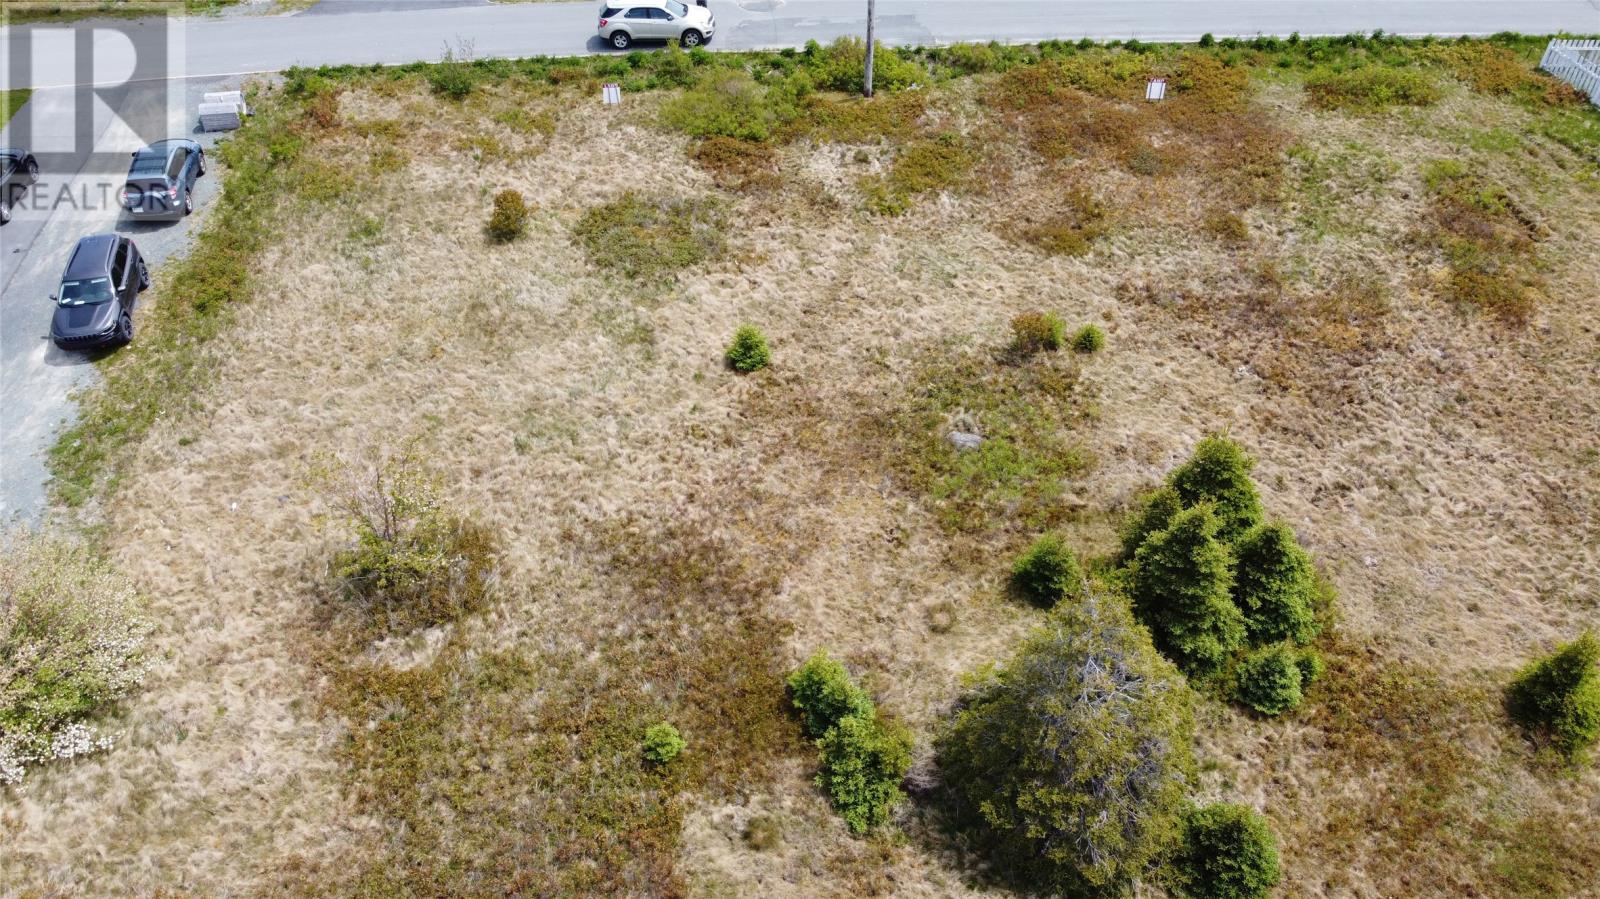 5 Hardings Lane, Bay Roberts, A0A1G0, ,Vacant land,For sale,Hardings,1246116